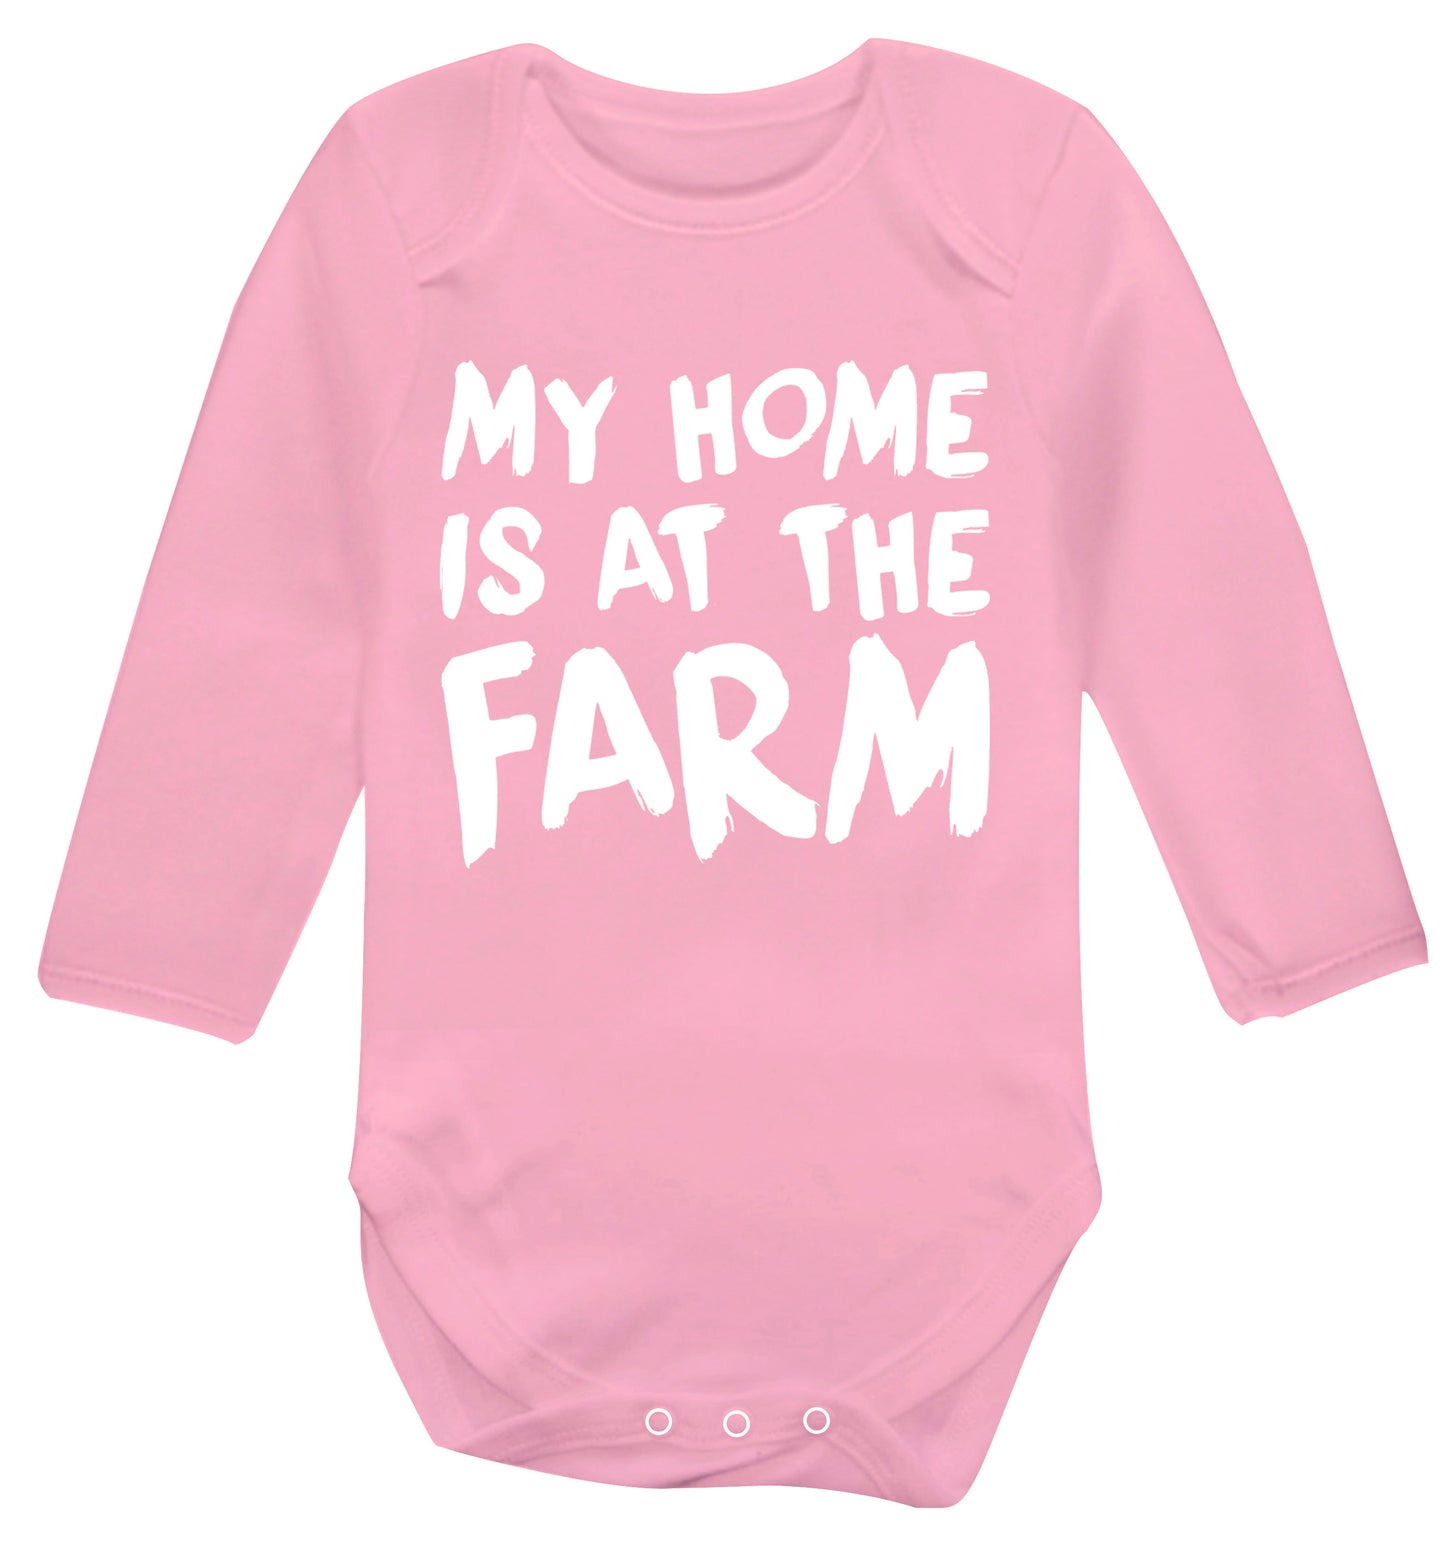 My home is at the farm Baby Vest long sleeved pale pink 6-12 months